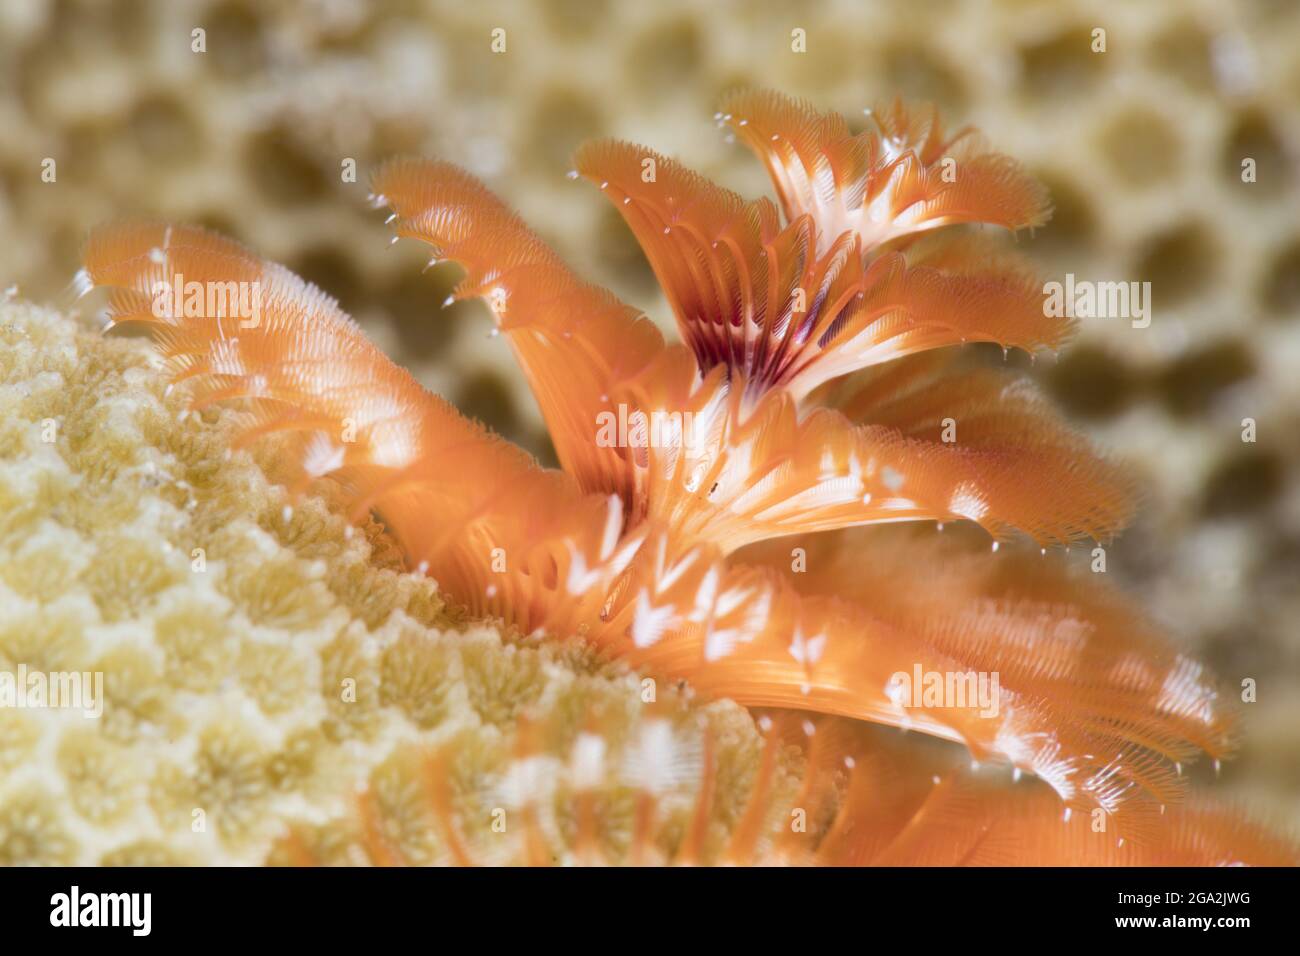 Close-up of the orange colored plumes of a Christmas tree worm (Spirobranchus giganteus) attached to coral; Maui, Hawaii, United States of America Stock Photo